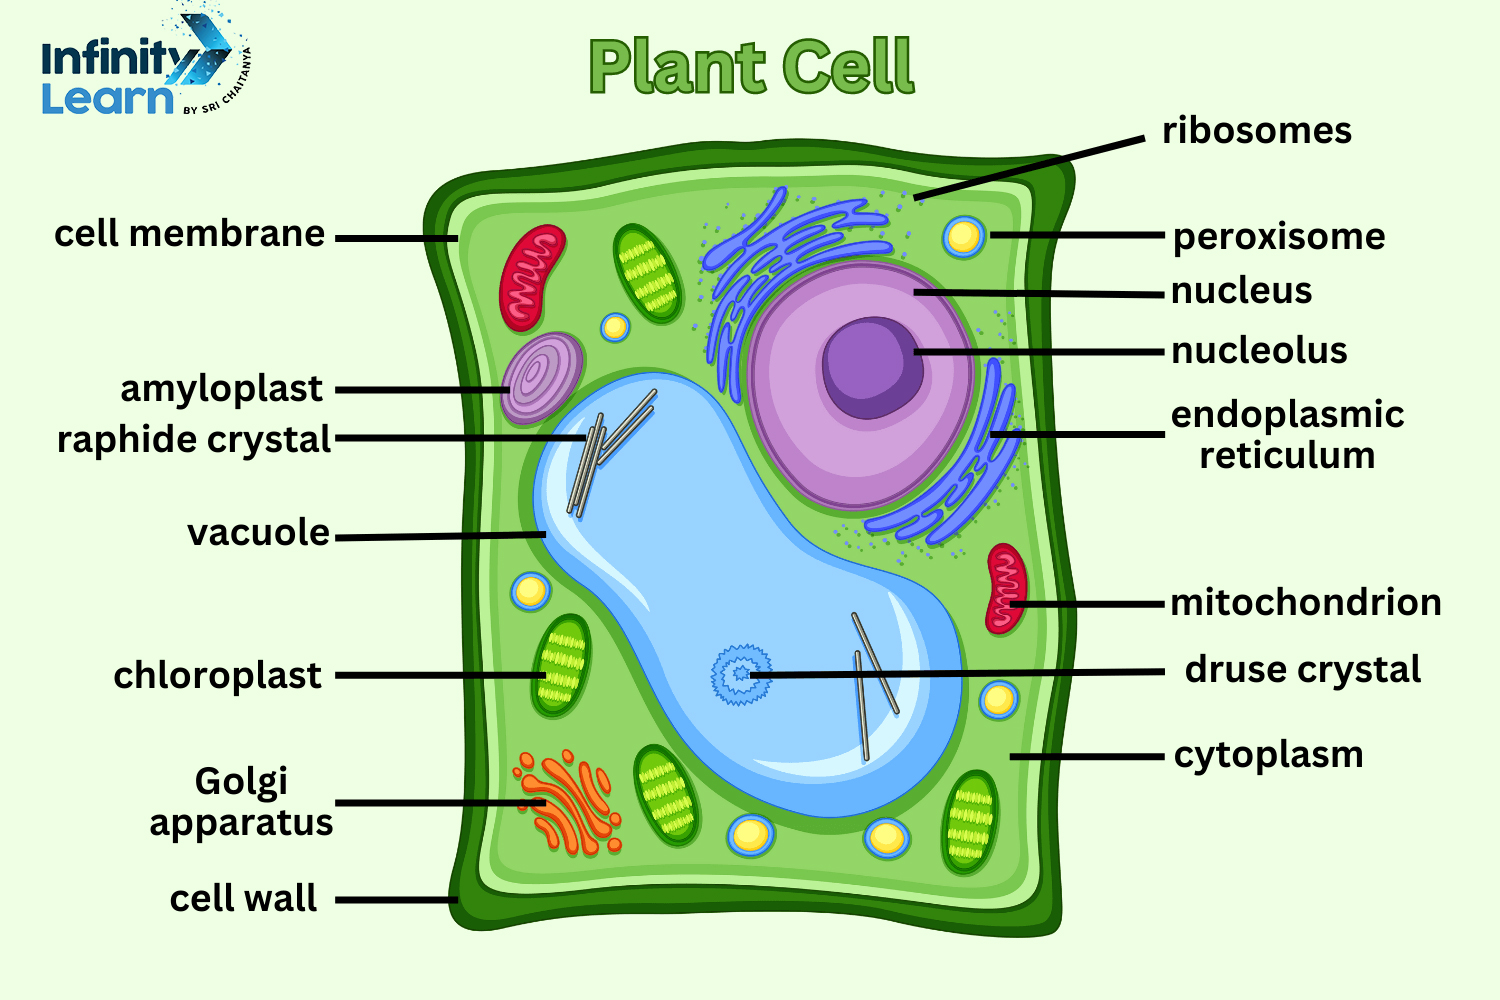 Plant Cell Diagram: Each and Every Components of Plat Cell Explained